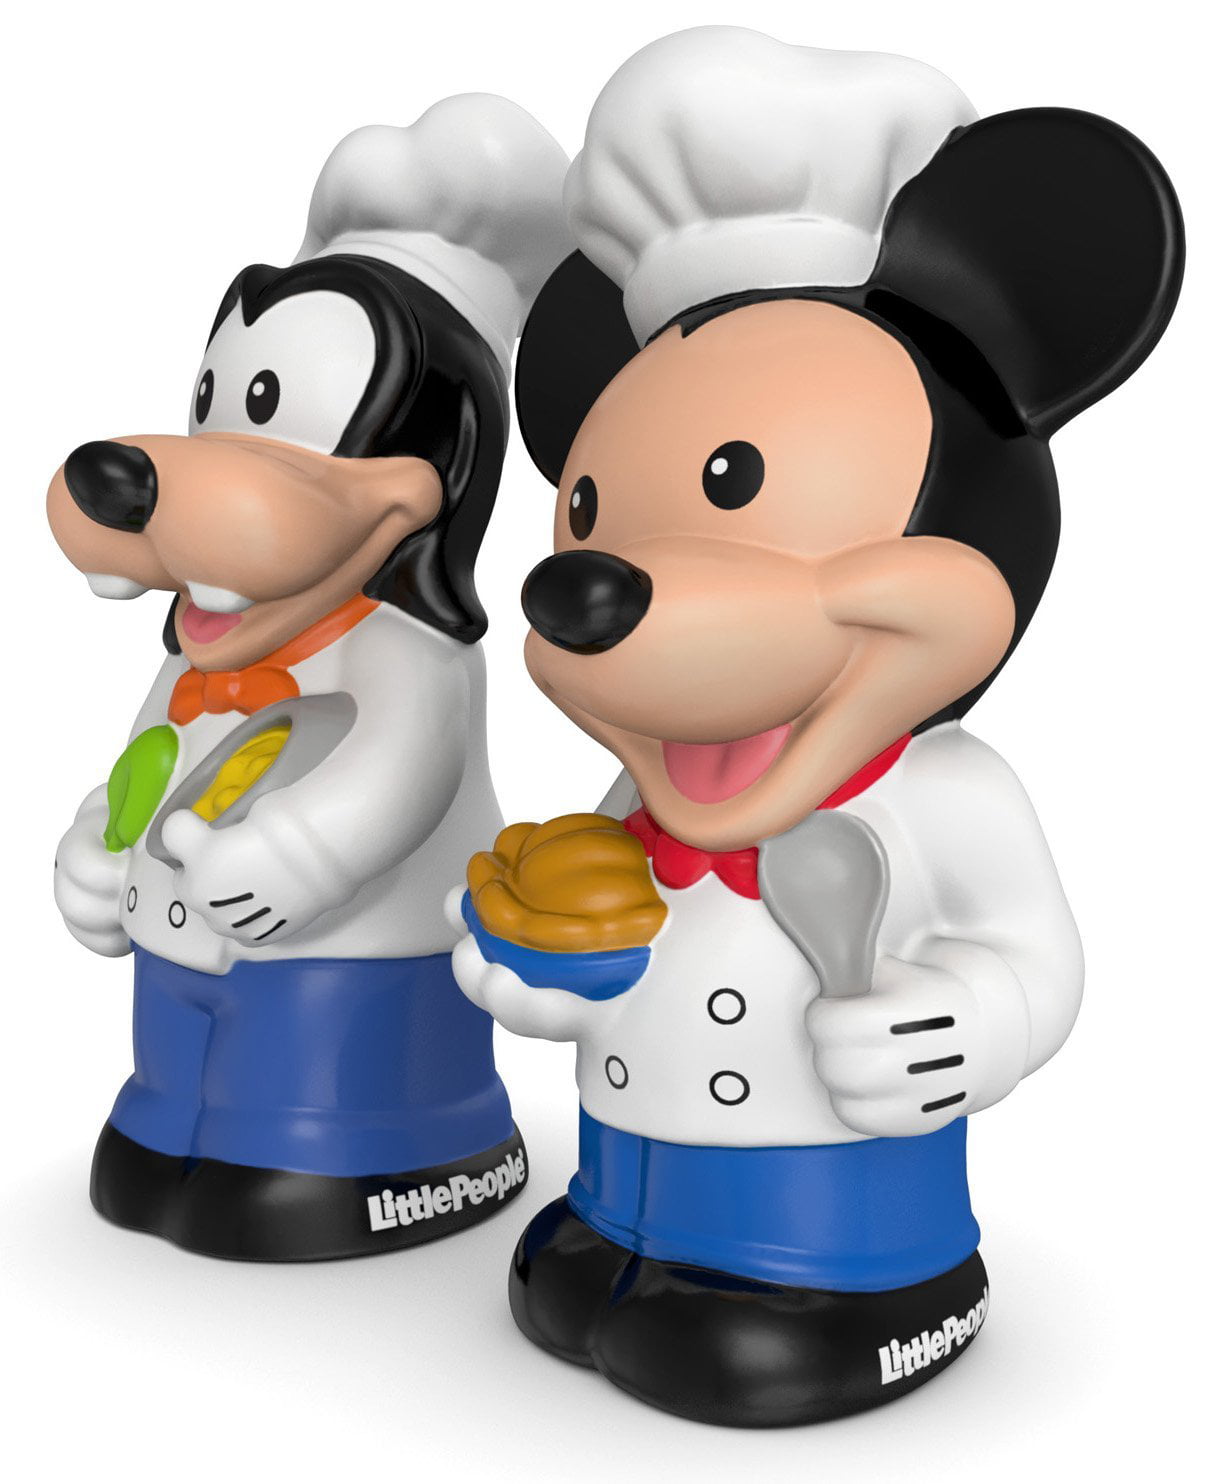 Fisher Price Little People Goofy Magic Disney NEW Mickey's Buddy chef baker Pack 